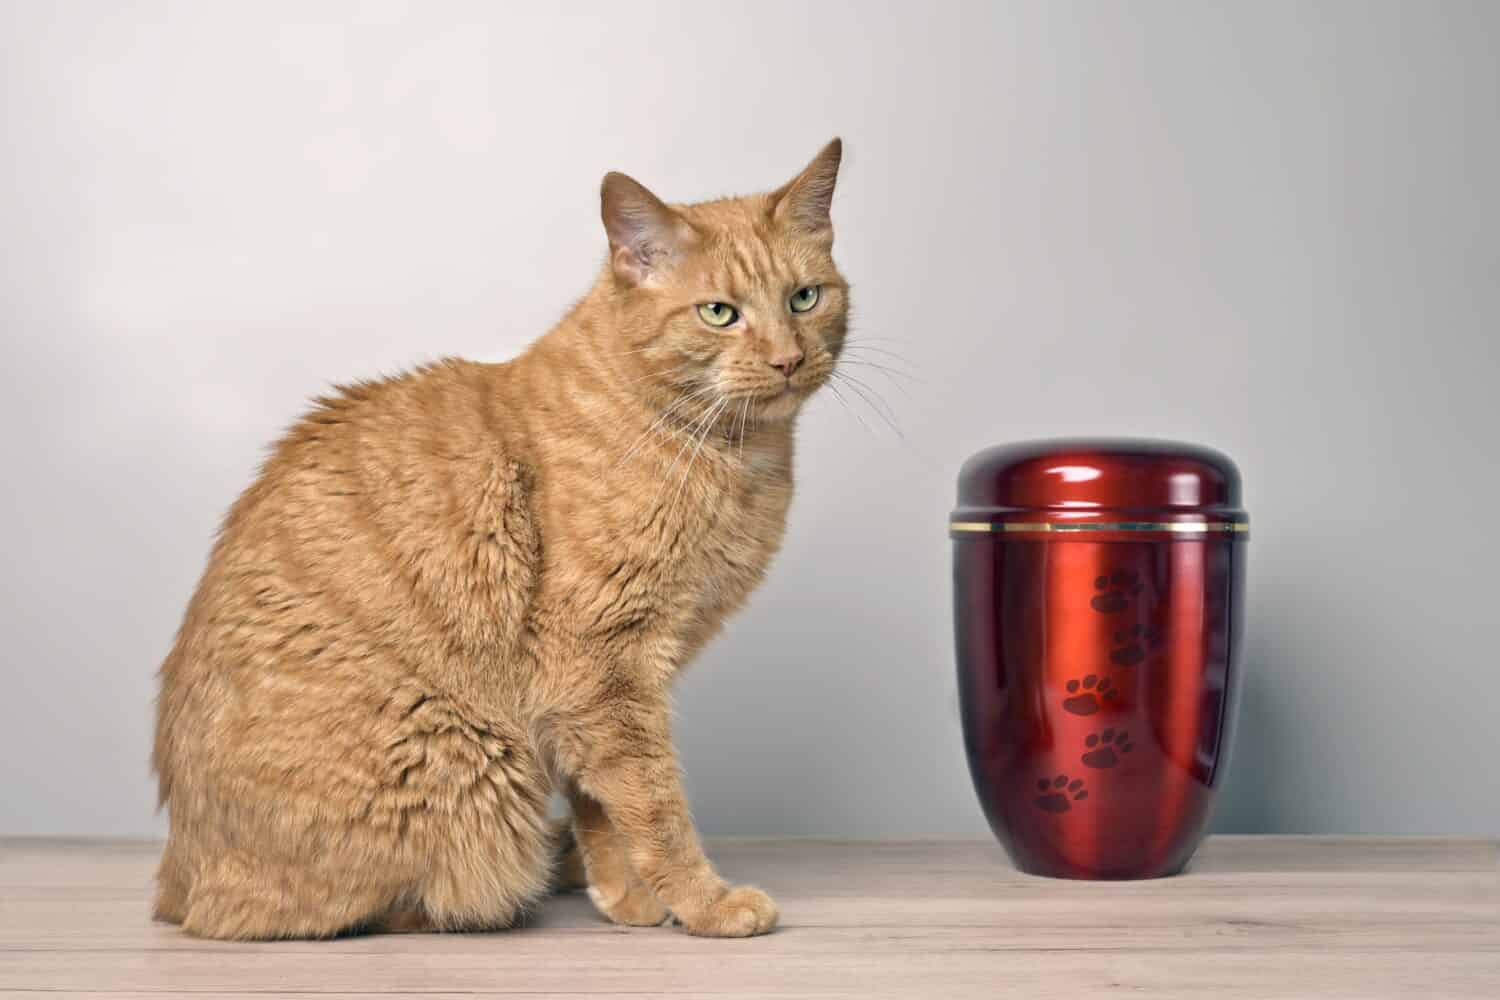 In remembrance of a pet. Tabby cat sits near an pet urn and mourns.